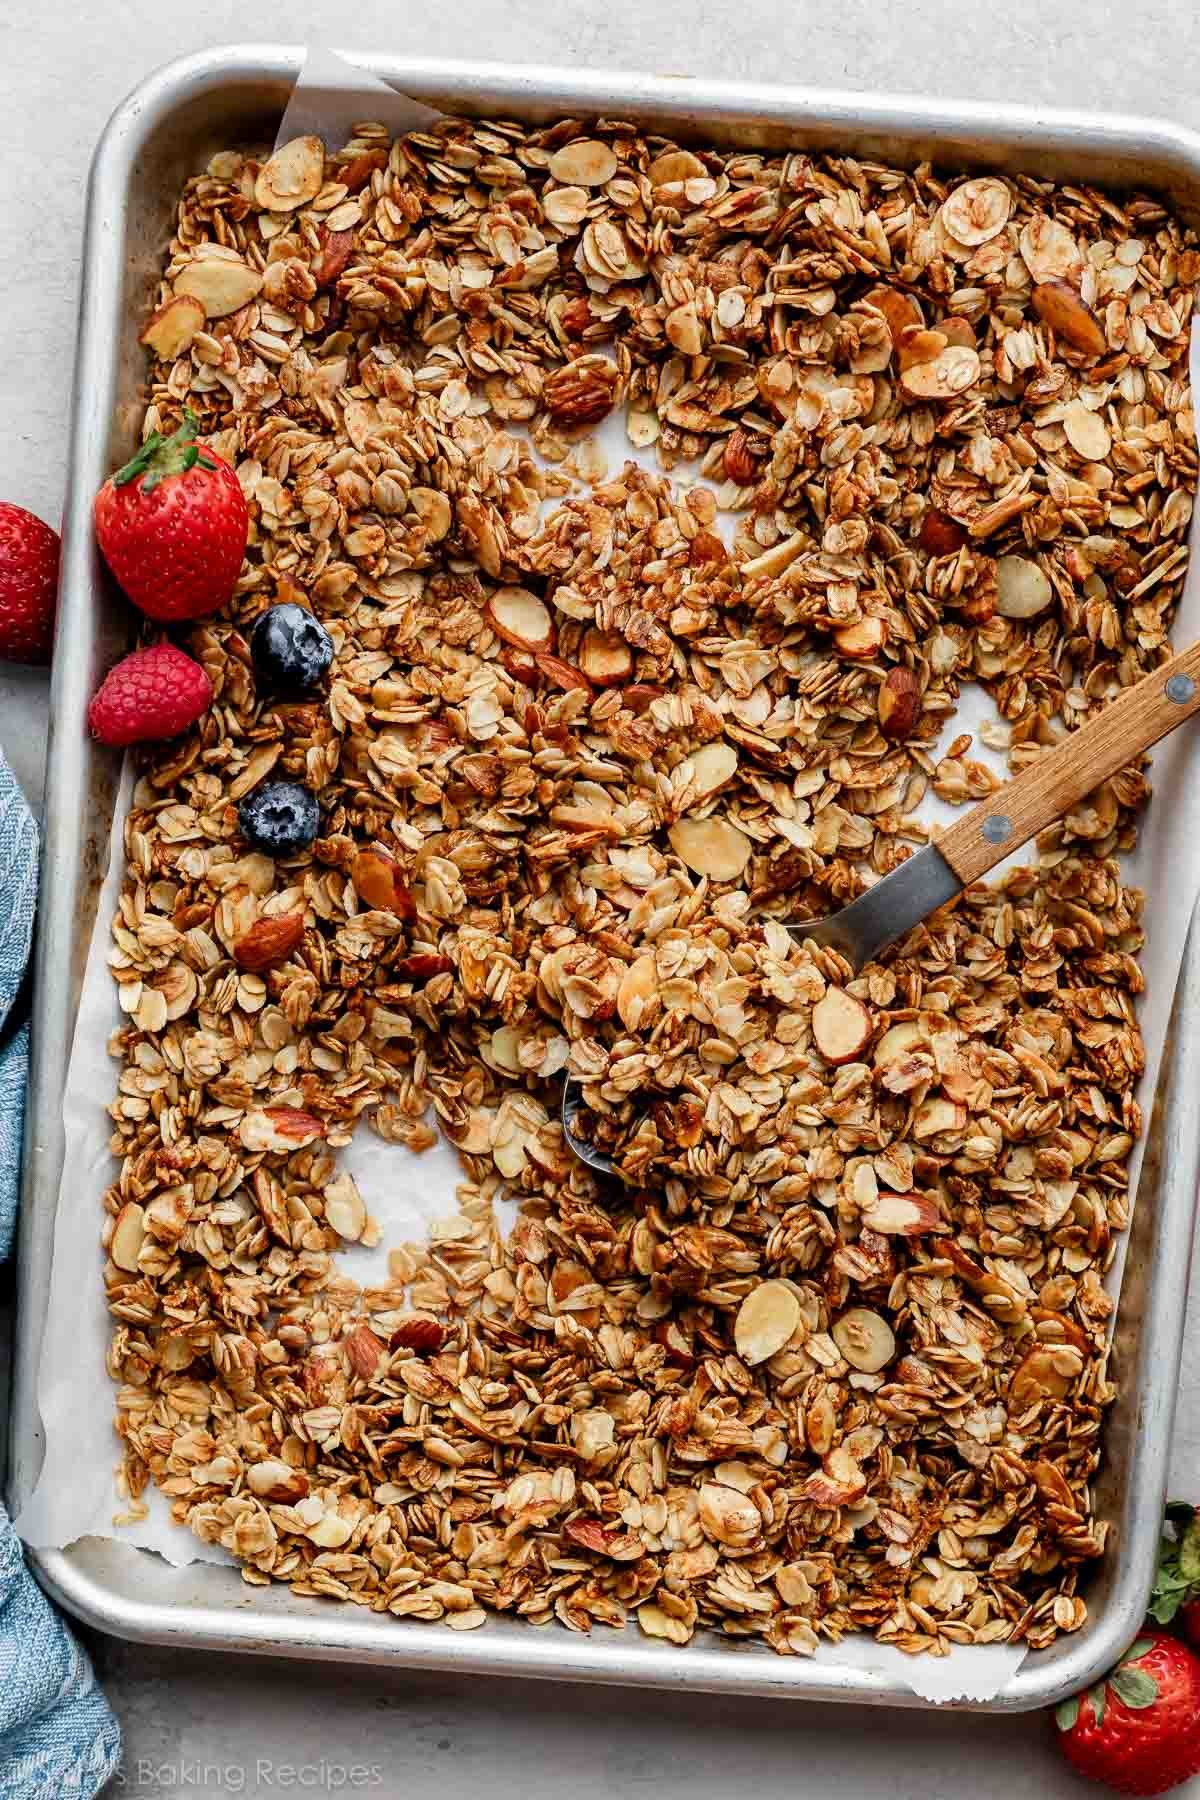 homemade vanilla almond granola spread on lined baking sheet with a couple fresh strawberries and blueberries.